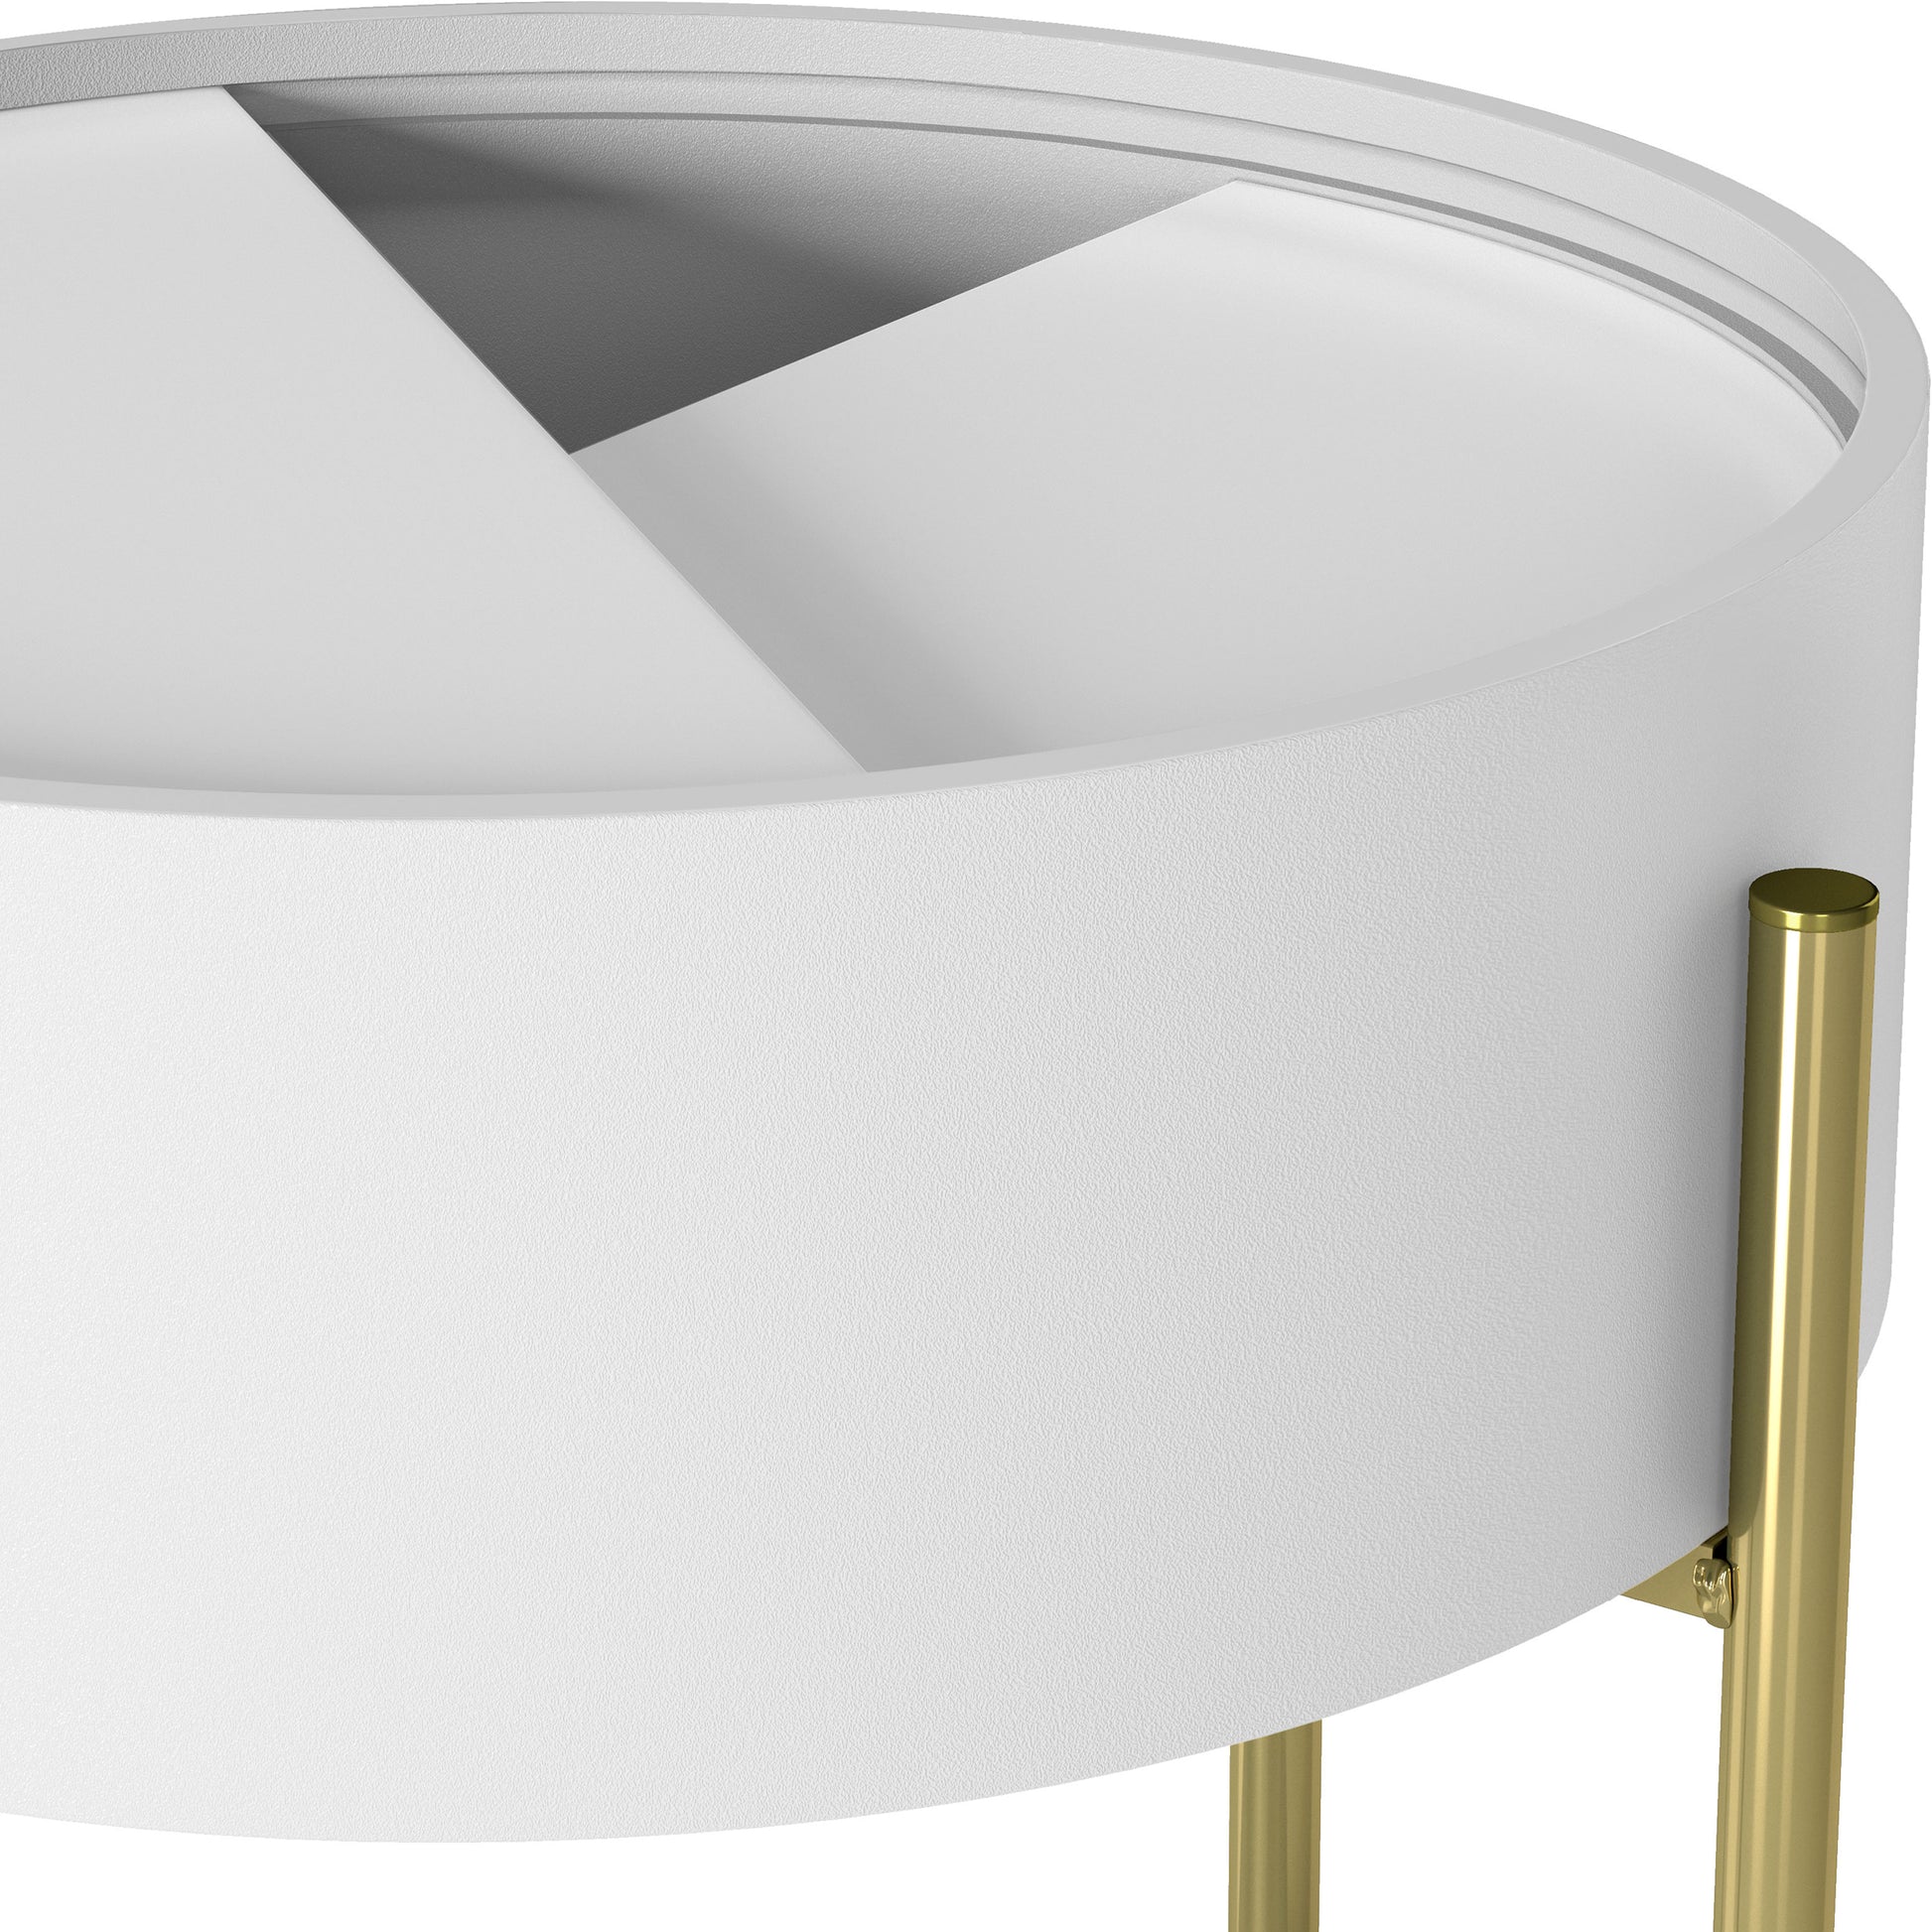 Angled close-up open tabletop/leg view of a modern white and gold round storage end table on a white background